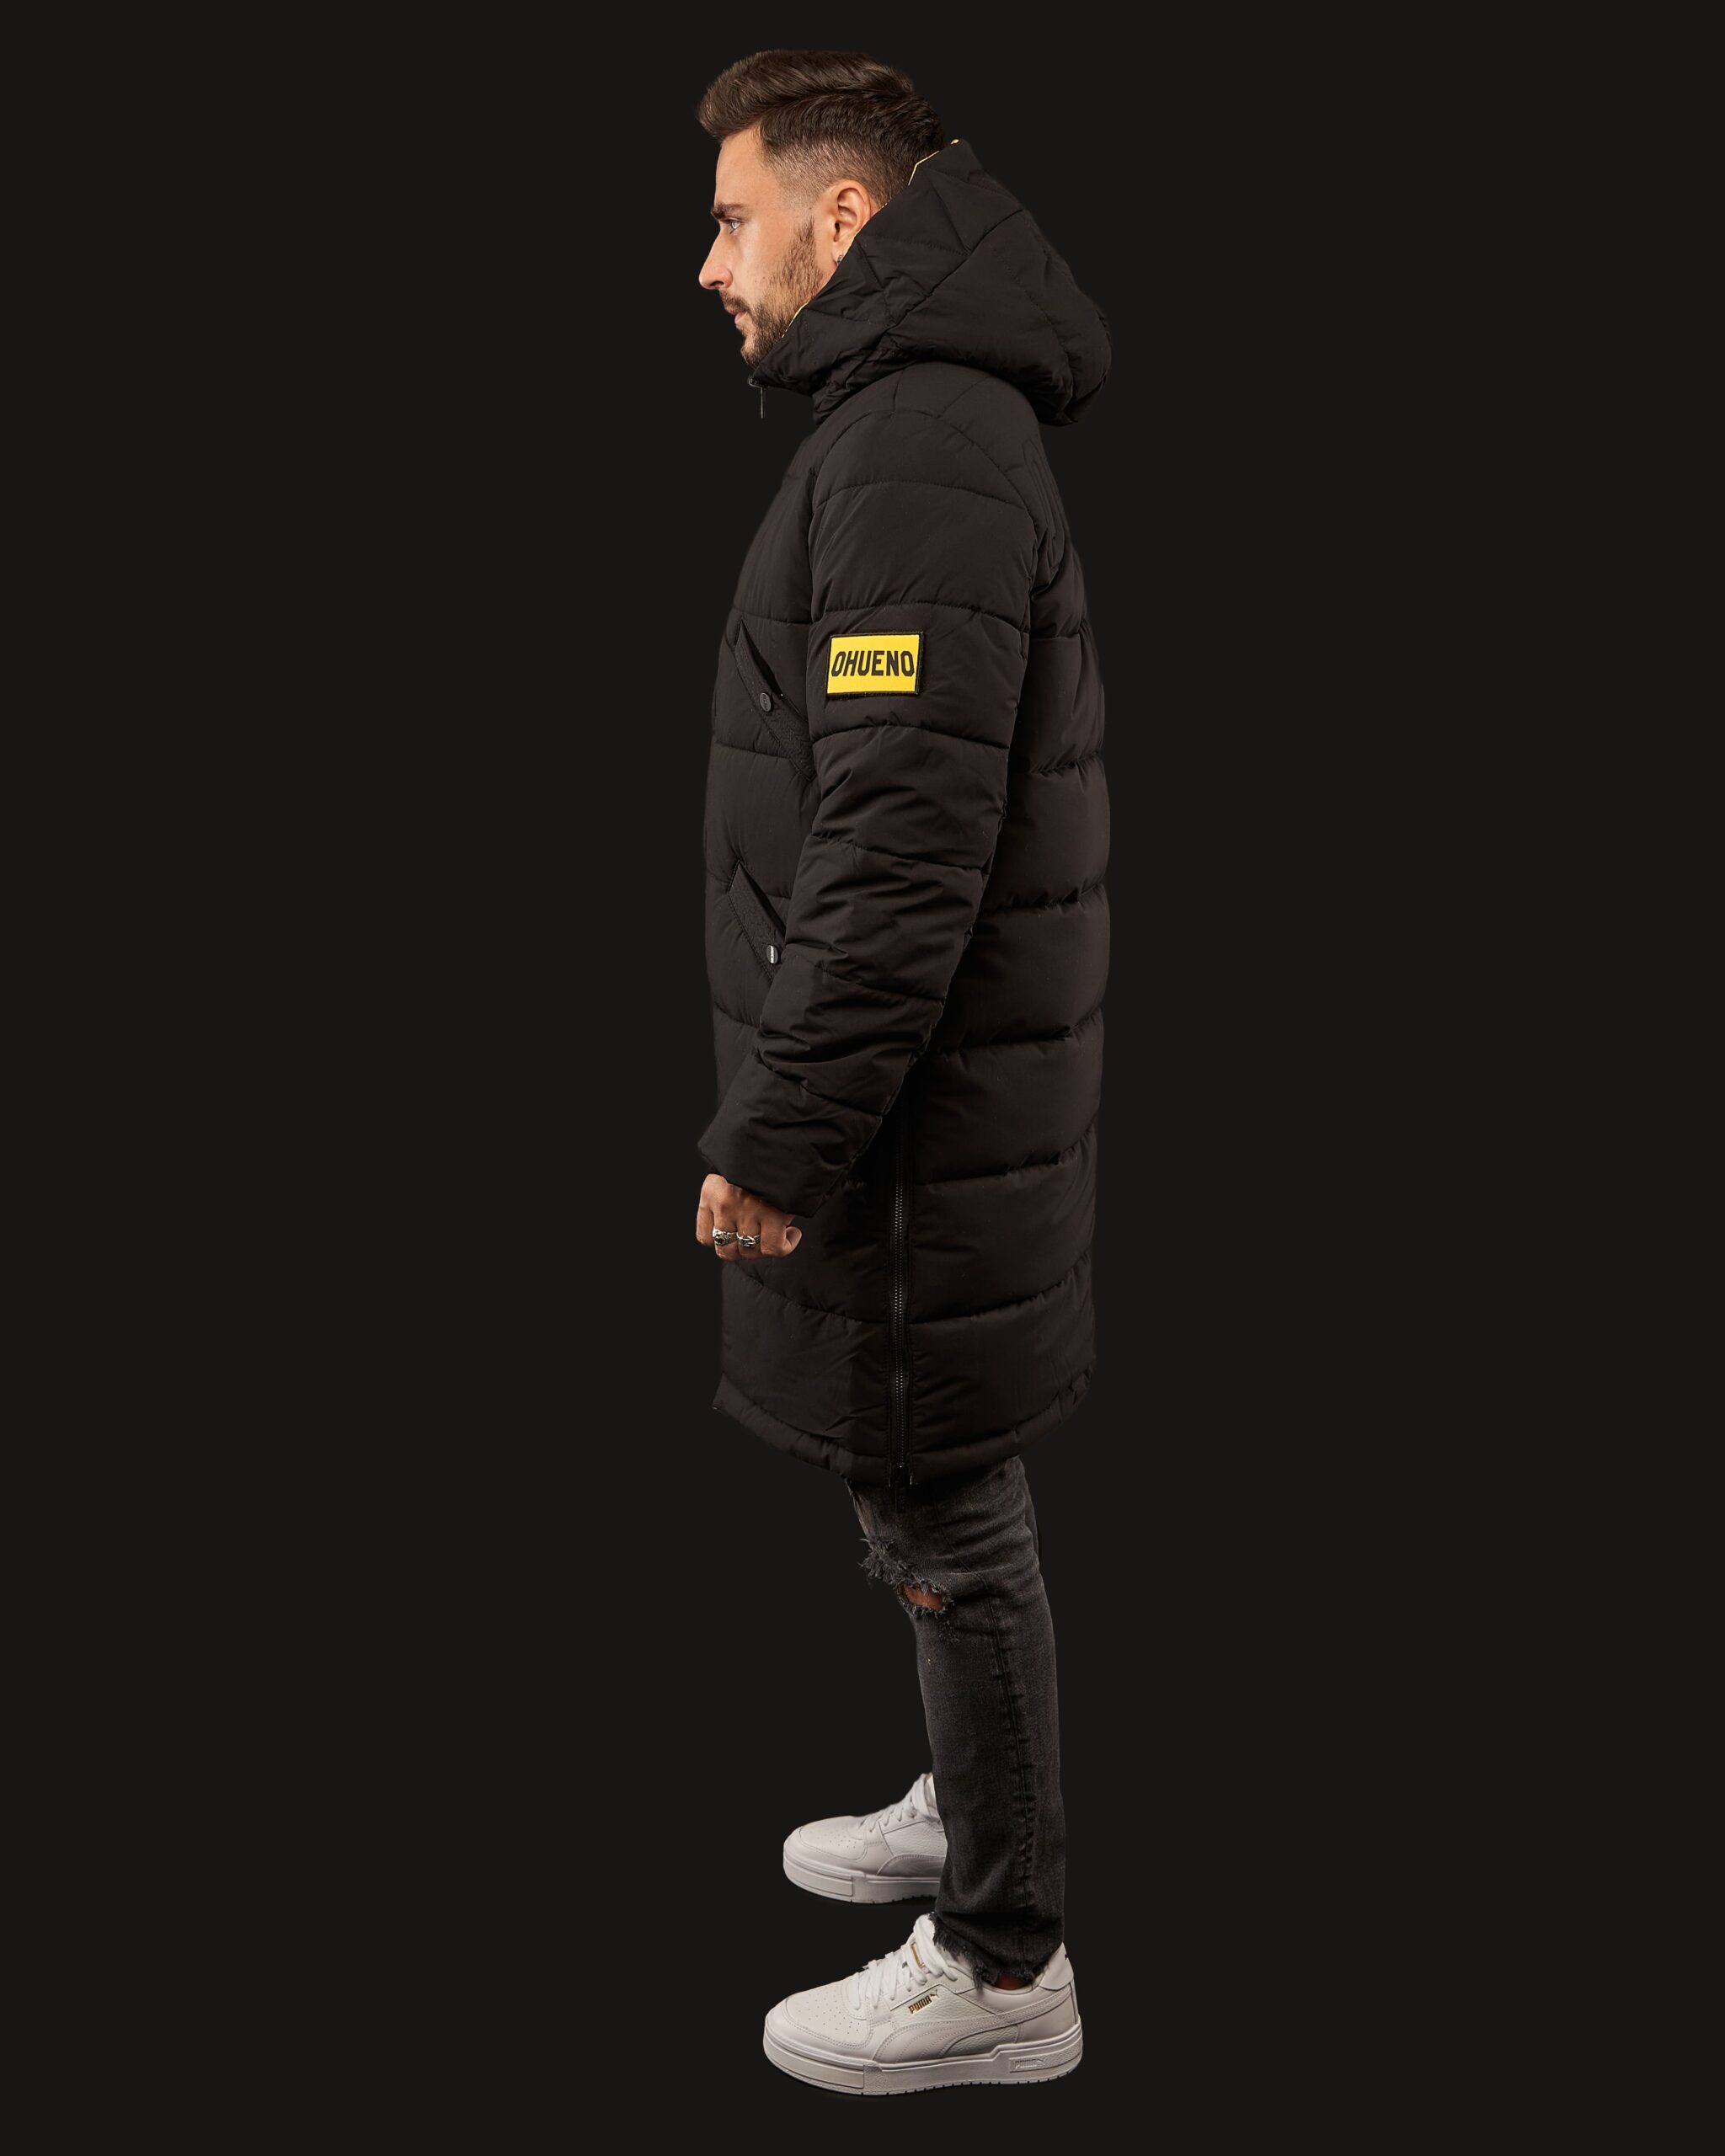 Down jacket Image: https://ohueno-official.com/wp-content/uploads/m01258-scaled.jpg